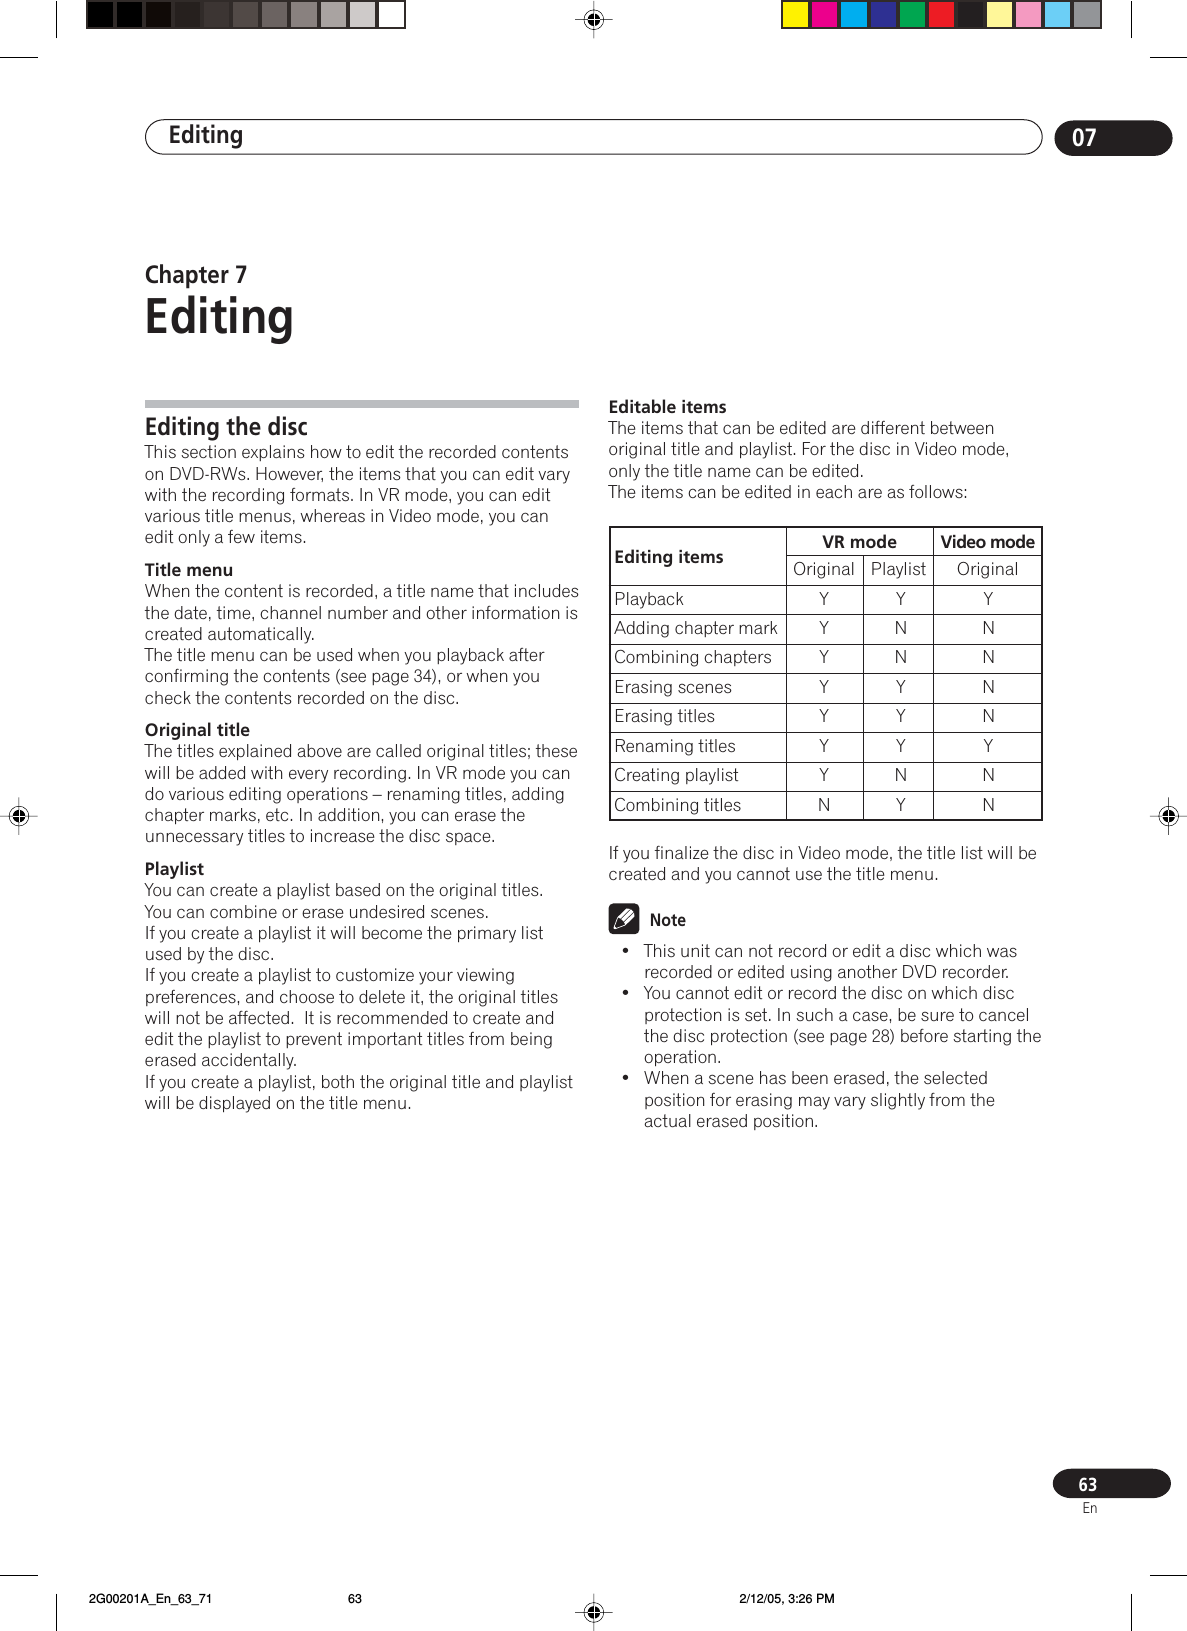 Editing 0763EnEditing the discThis section explains how to edit the recorded contentson DVD-RWs. However, the items that you can edit varywith the recording formats. In VR mode, you can editvarious title menus, whereas in Video mode, you canedit only a few items.Title menuWhen the content is recorded, a title name that includesthe date, time, channel number and other information iscreated automatically.The title menu can be used when you playback afterconfirming the contents (see page 34), or when youcheck the contents recorded on the disc.Original titleThe titles explained above are called original titles; thesewill be added with every recording. In VR mode you cando various editing operations – renaming titles, addingchapter marks, etc. In addition, you can erase theunnecessary titles to increase the disc space.PlaylistYou can create a playlist based on the original titles.You can combine or erase undesired scenes.If you create a playlist it will become the primary listused by the disc.If you create a playlist to customize your viewingpreferences, and choose to delete it, the original titleswill not be affected.  It is recommended to create andedit the playlist to prevent important titles from beingerased accidentally.If you create a playlist, both the original title and playlistwill be displayed on the title menu.Editable itemsThe items that can be edited are different betweenoriginal title and playlist. For the disc in Video mode,only the title name can be edited.The items can be edited in each are as follows:If you finalize the disc in Video mode, the title list will becreated and you cannot use the title menu.Note• This unit can not record or edit a disc which wasrecorded or edited using another DVD recorder.• You cannot edit or record the disc on which discprotection is set. In such a case, be sure to cancelthe disc protection (see page 28) before starting theoperation.• When a scene has been erased, the selectedposition for erasing may vary slightly from theactual erased position.Chapter 7EditingEditing items VR modePlaybackAdding chapter markCombining chaptersErasing scenesErasing titlesRenaming titlesCreating playlistCombining titlesOriginal PlaylistYYYYYYYNYNNYYYNYYNNNNYNNVideo modeOriginal 2G00201A_En_63_71 2/12/05, 3:26 PM63